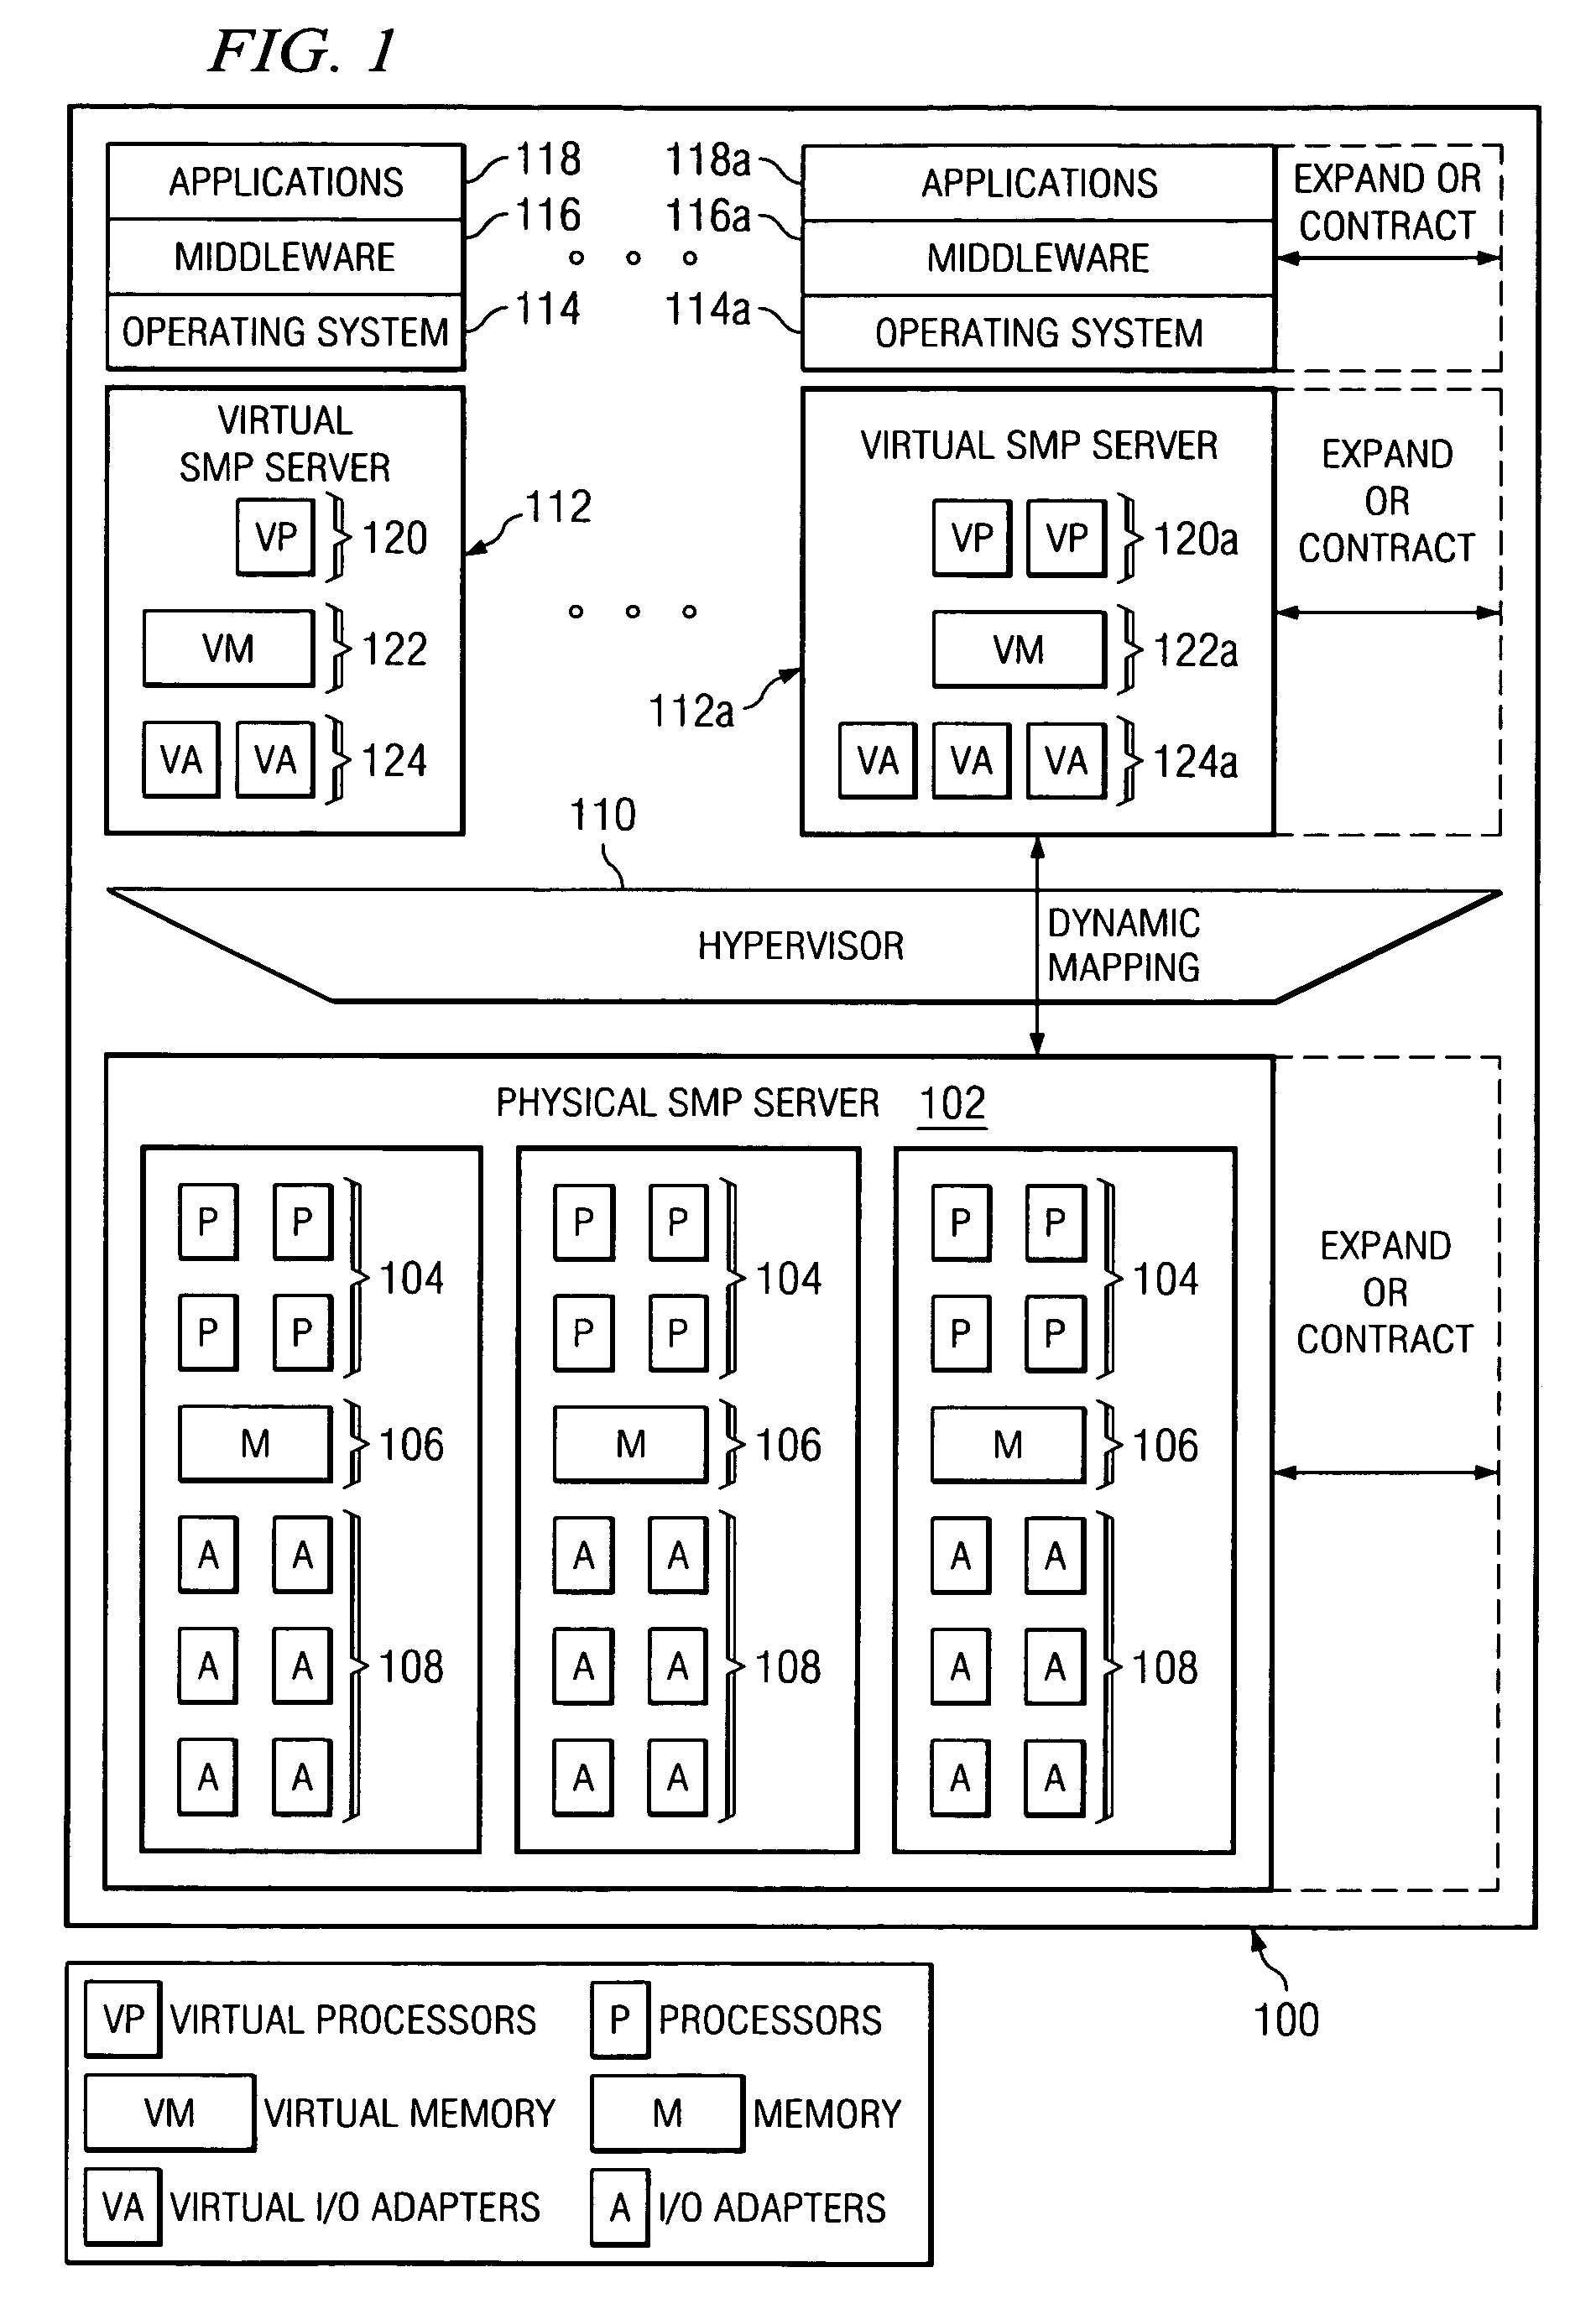 Method for dynamically managing power in microprocessor chips according to present processing demands